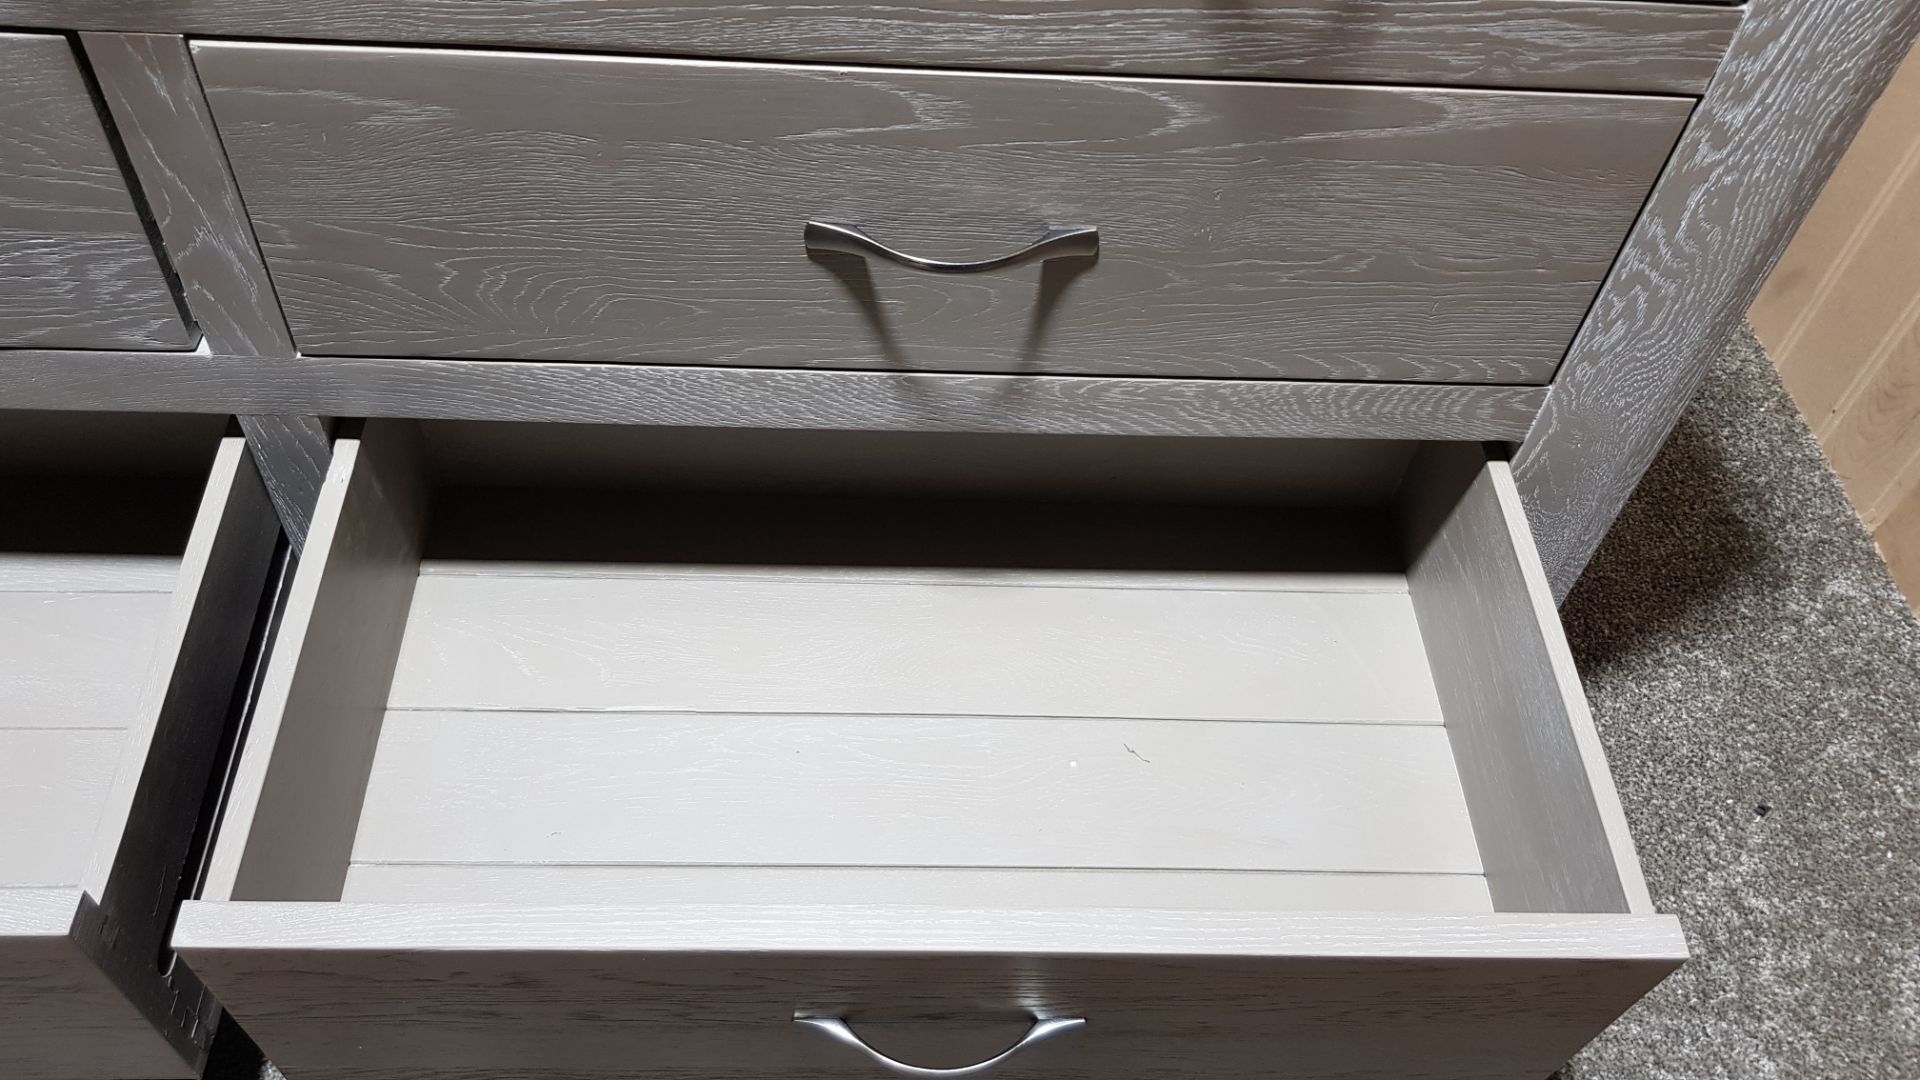 Willow Solid Oak With Grey Wash 7 Drawer Chest. Dimensions: (H78x W140x D45cm). - Image 19 of 19